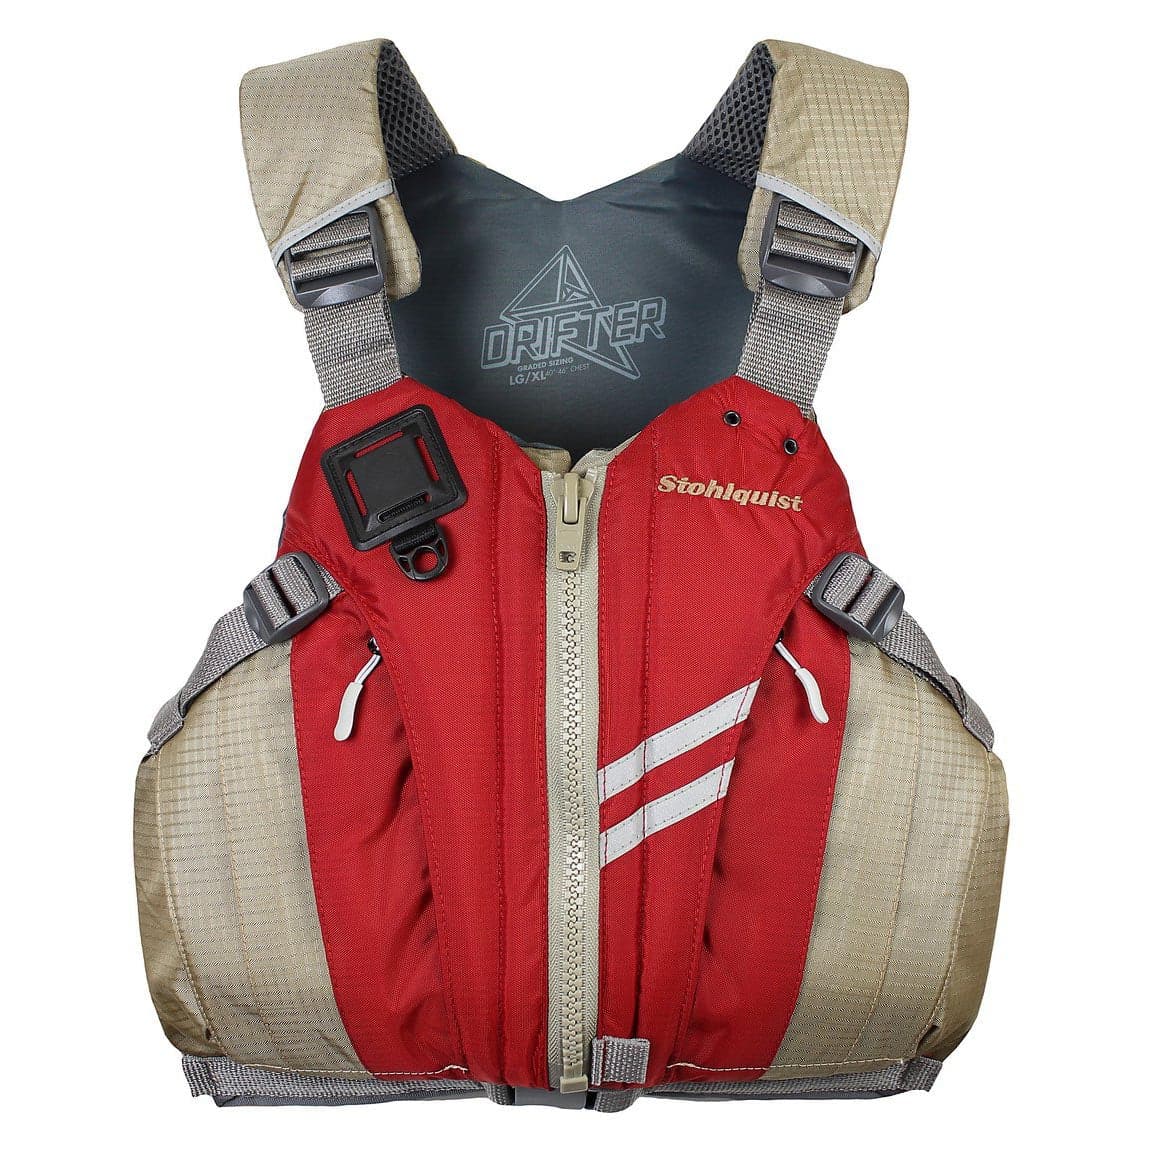 Featuring the Drifter PFD gift for kayaker, men's pfd manufactured by Stohlquist shown here from one angle.